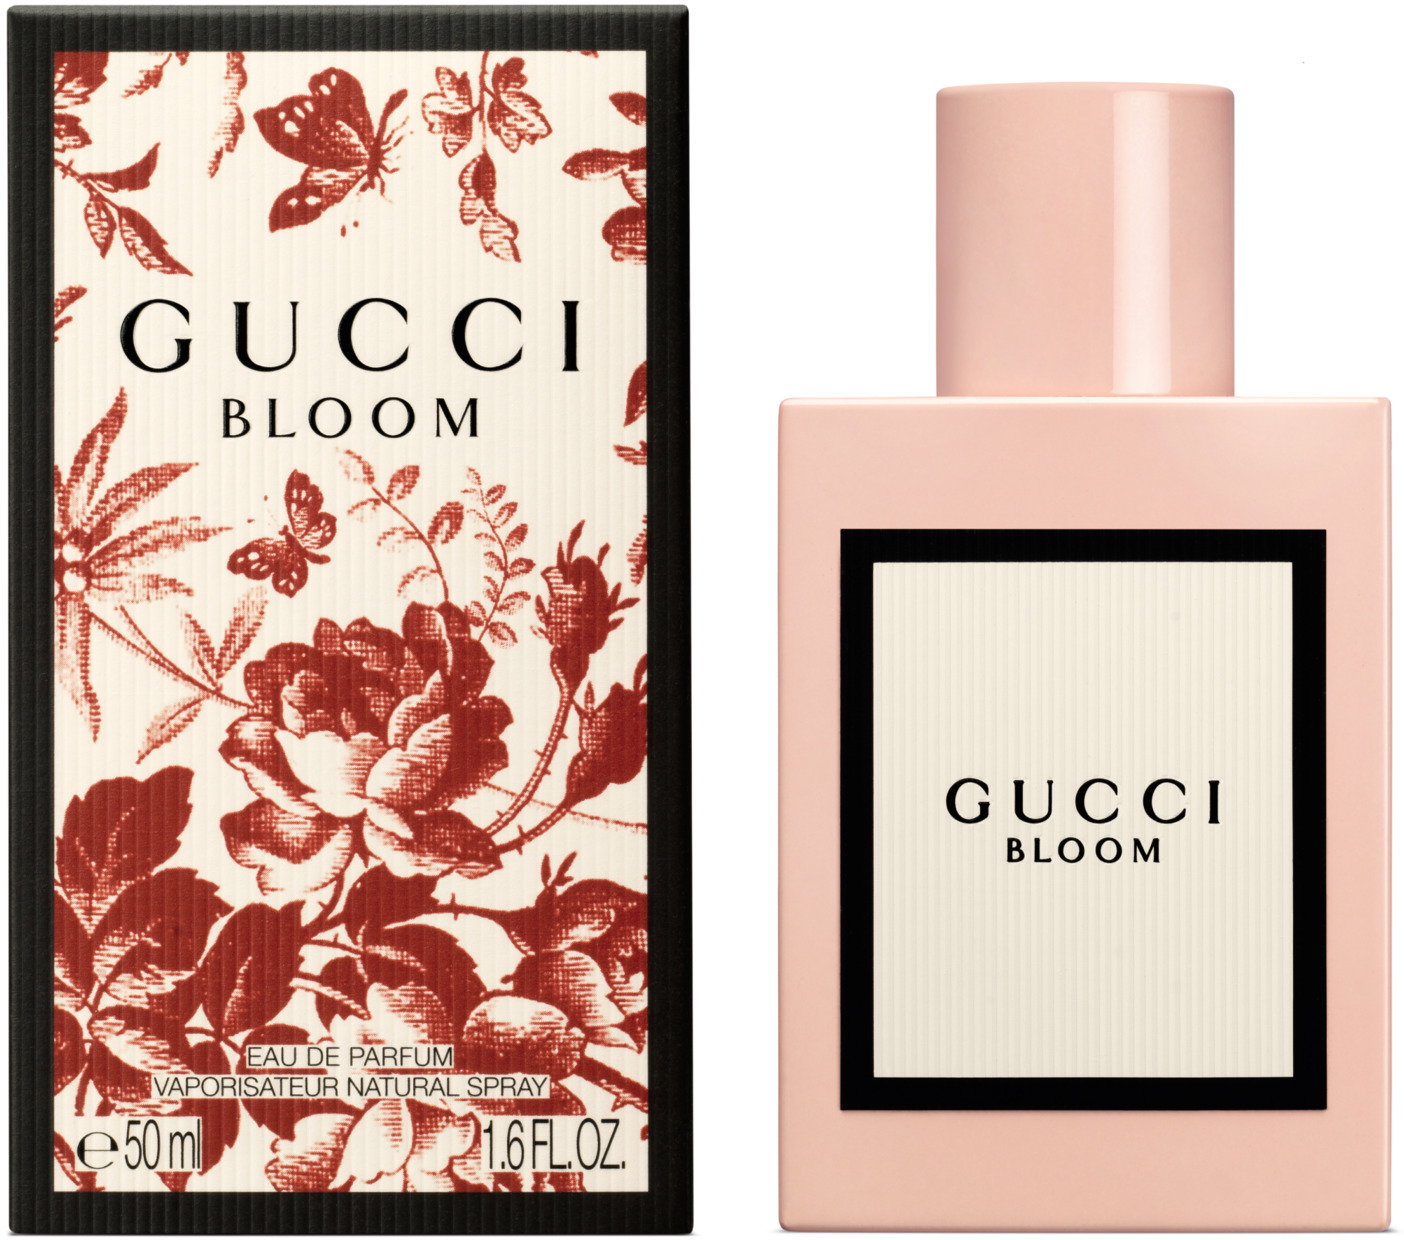 Gucci Bloom EdP 50ml in duty-free at 